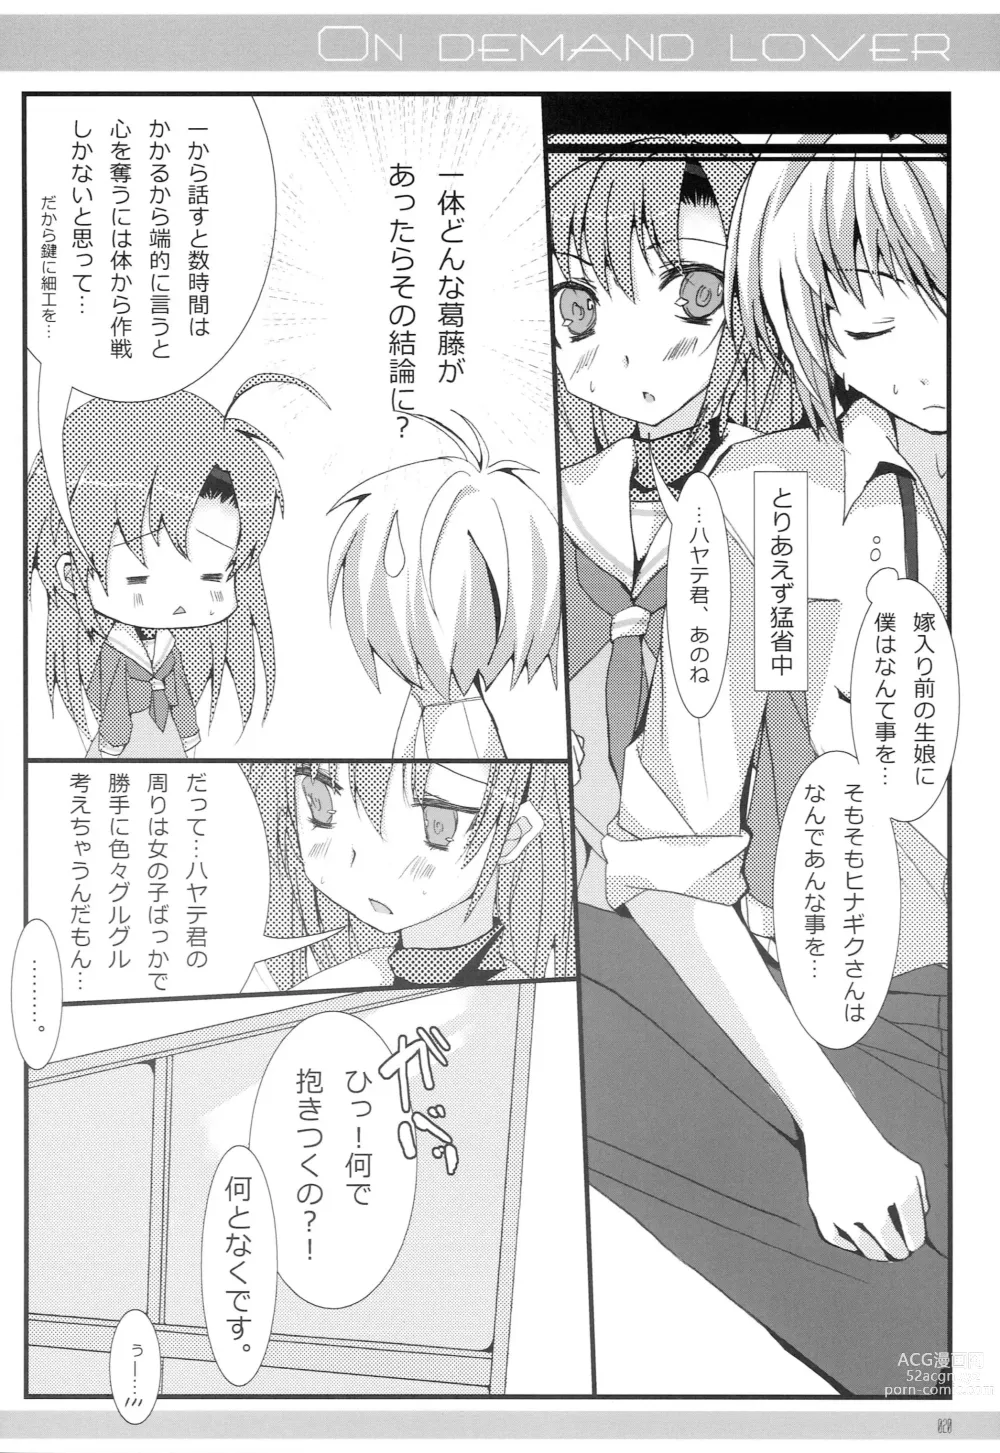 Page 18 of doujinshi ON DEMAND LOVER